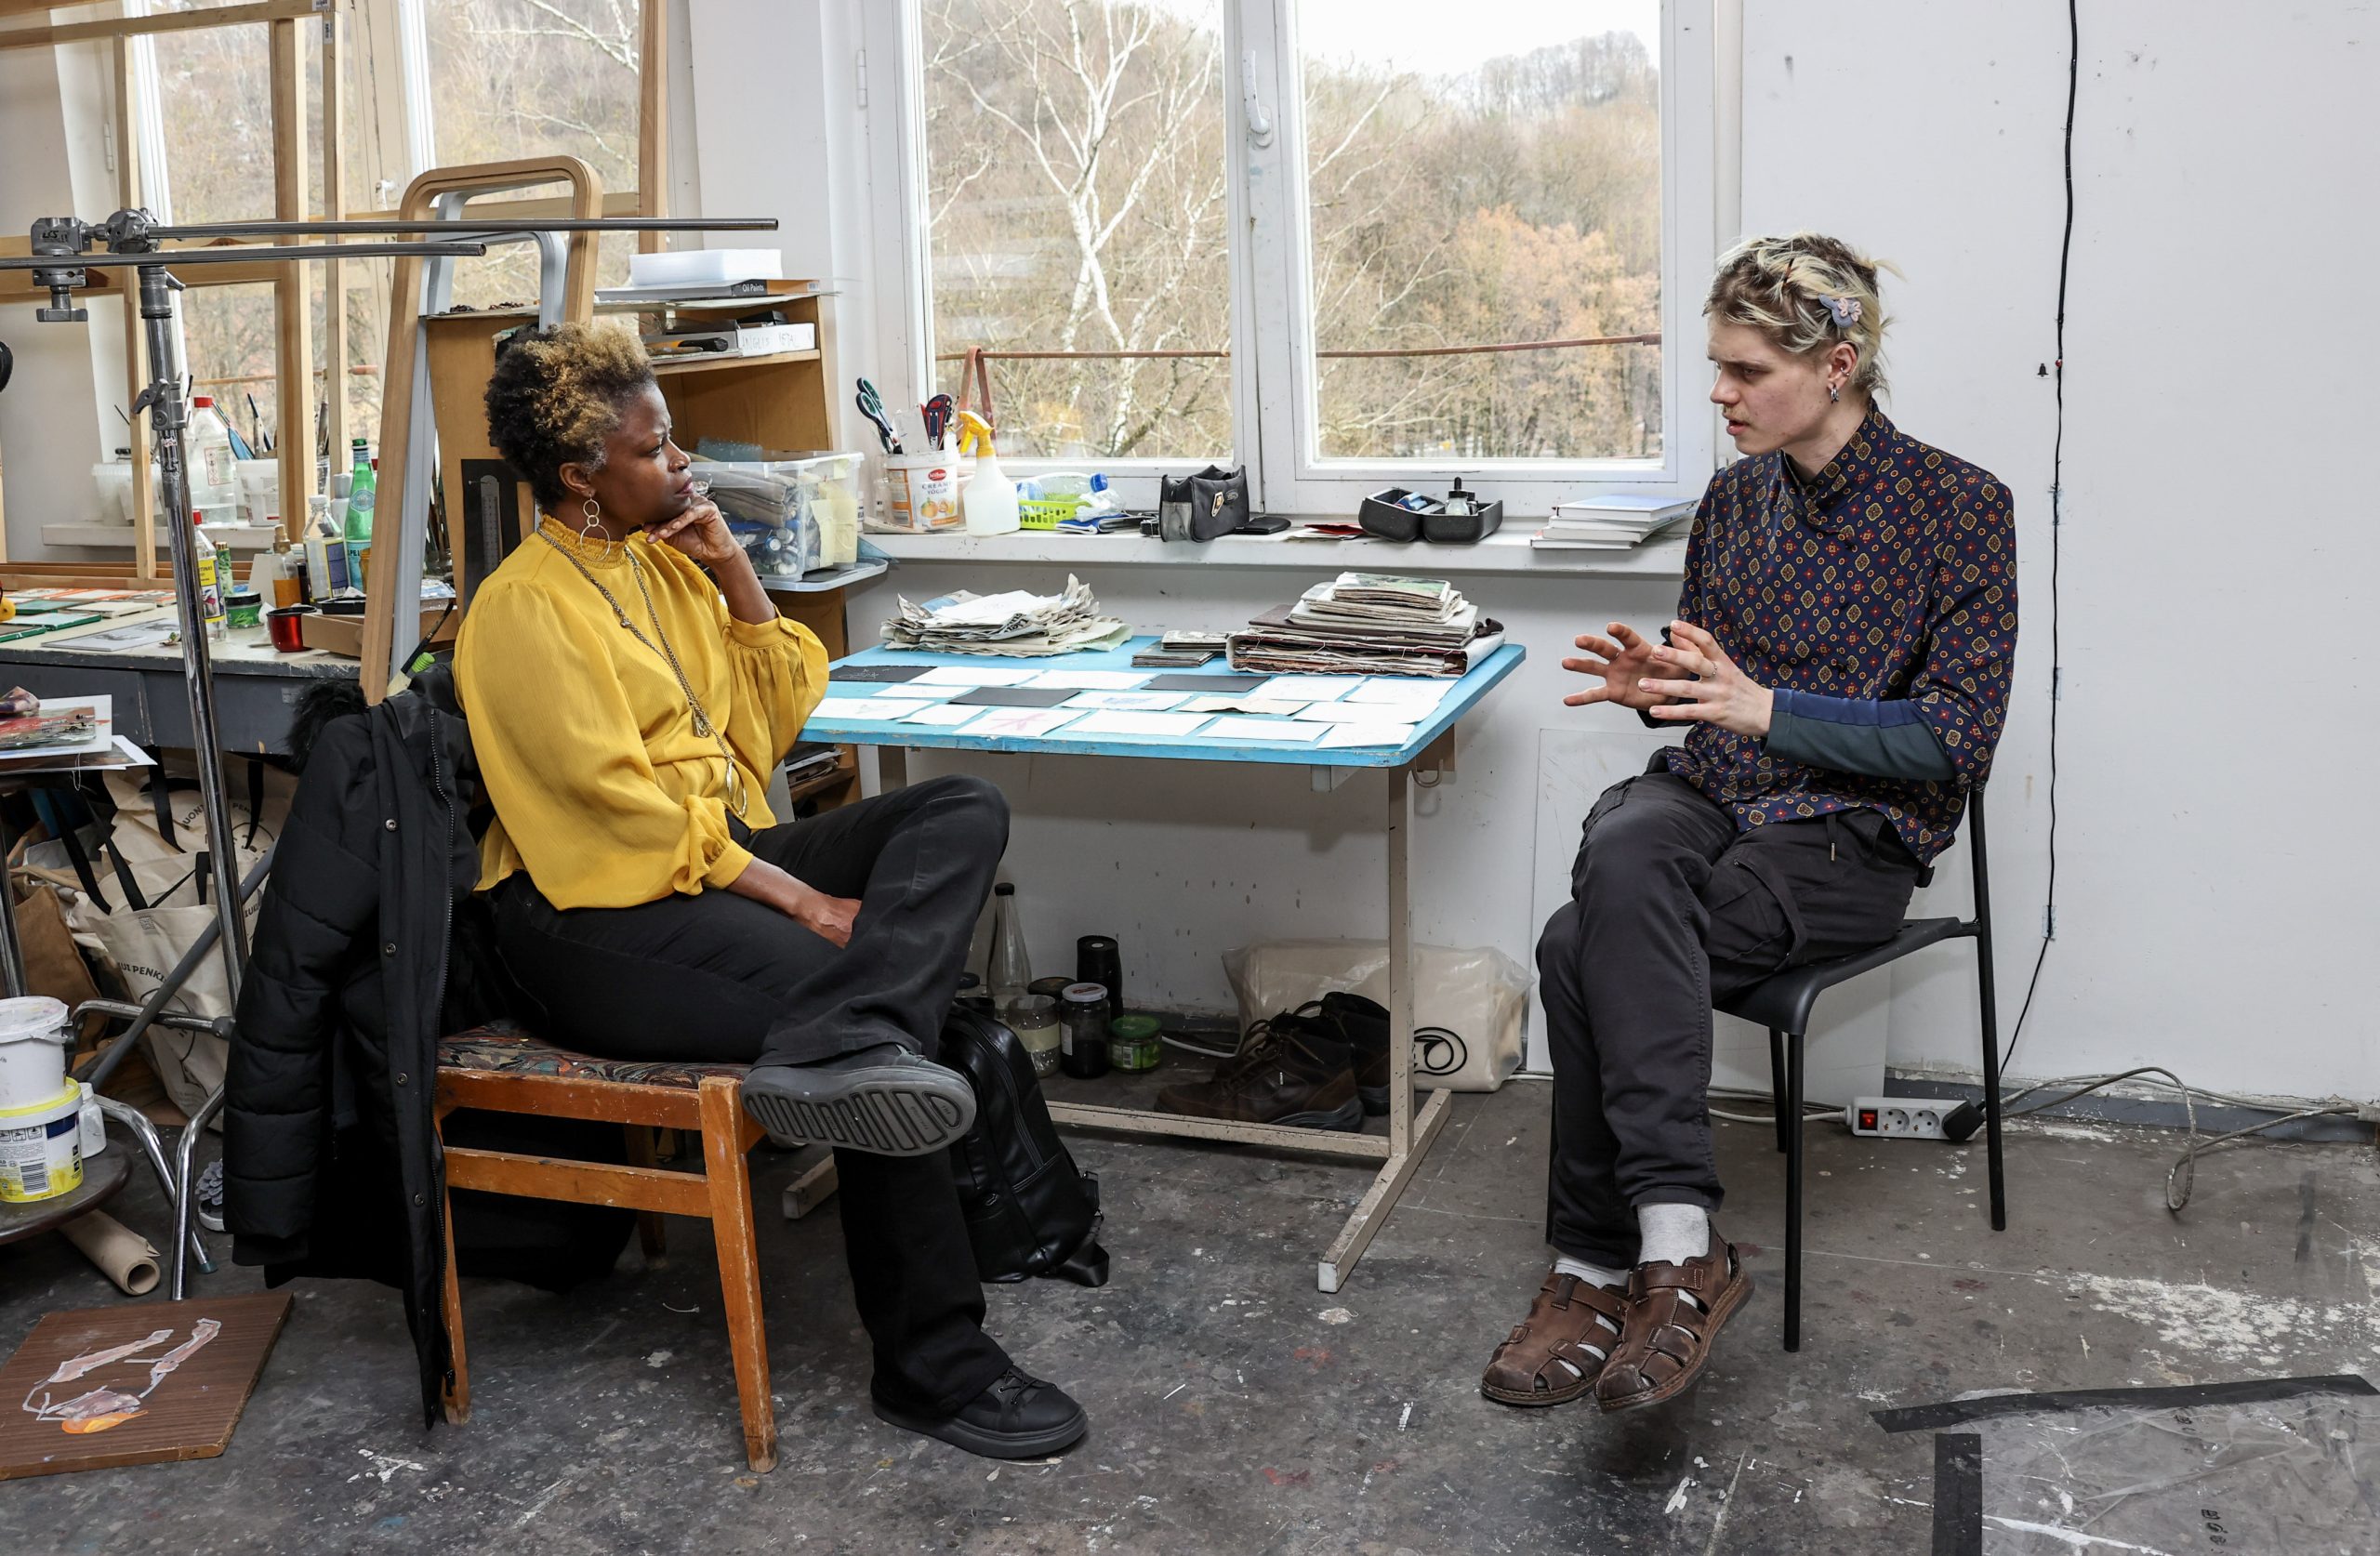 That afternoon, she met one-on-one with students to do studio visits and offer her experience as both as an artist and art critic. She also spoke with them about what it really is to be an artist in America.